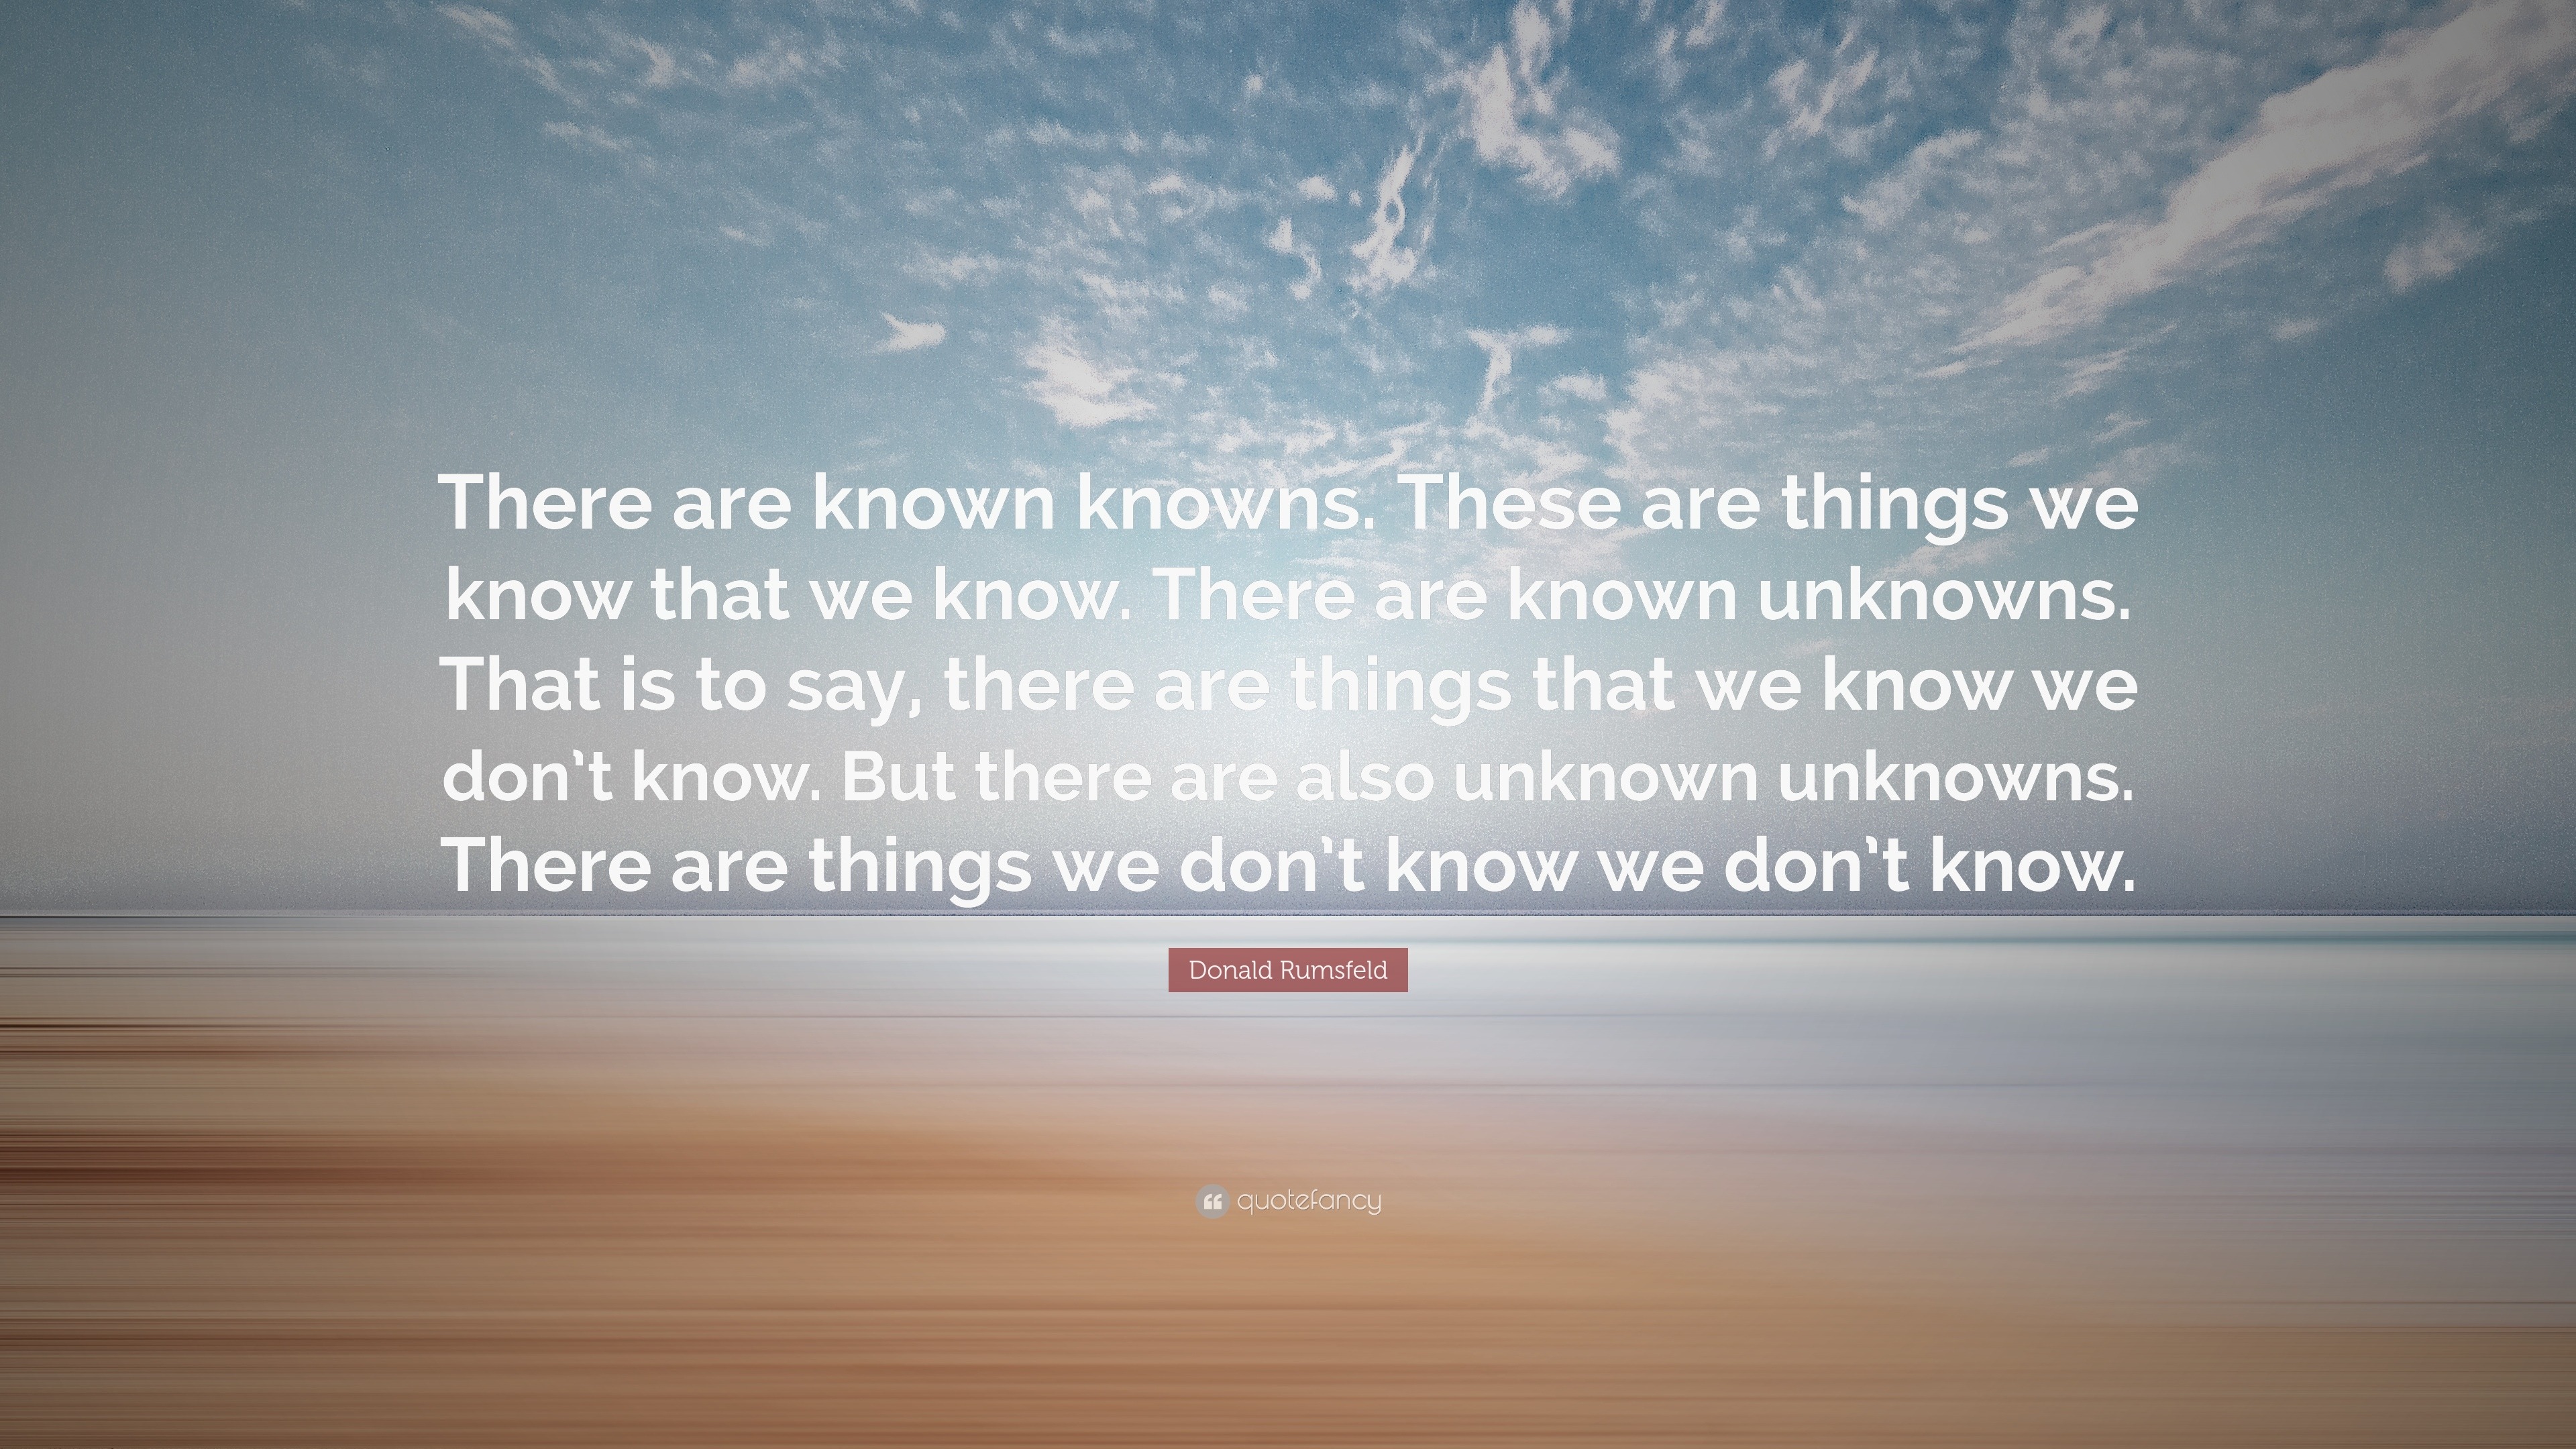 Donald Rumsfeld Quote: “There are known knowns. These are things we